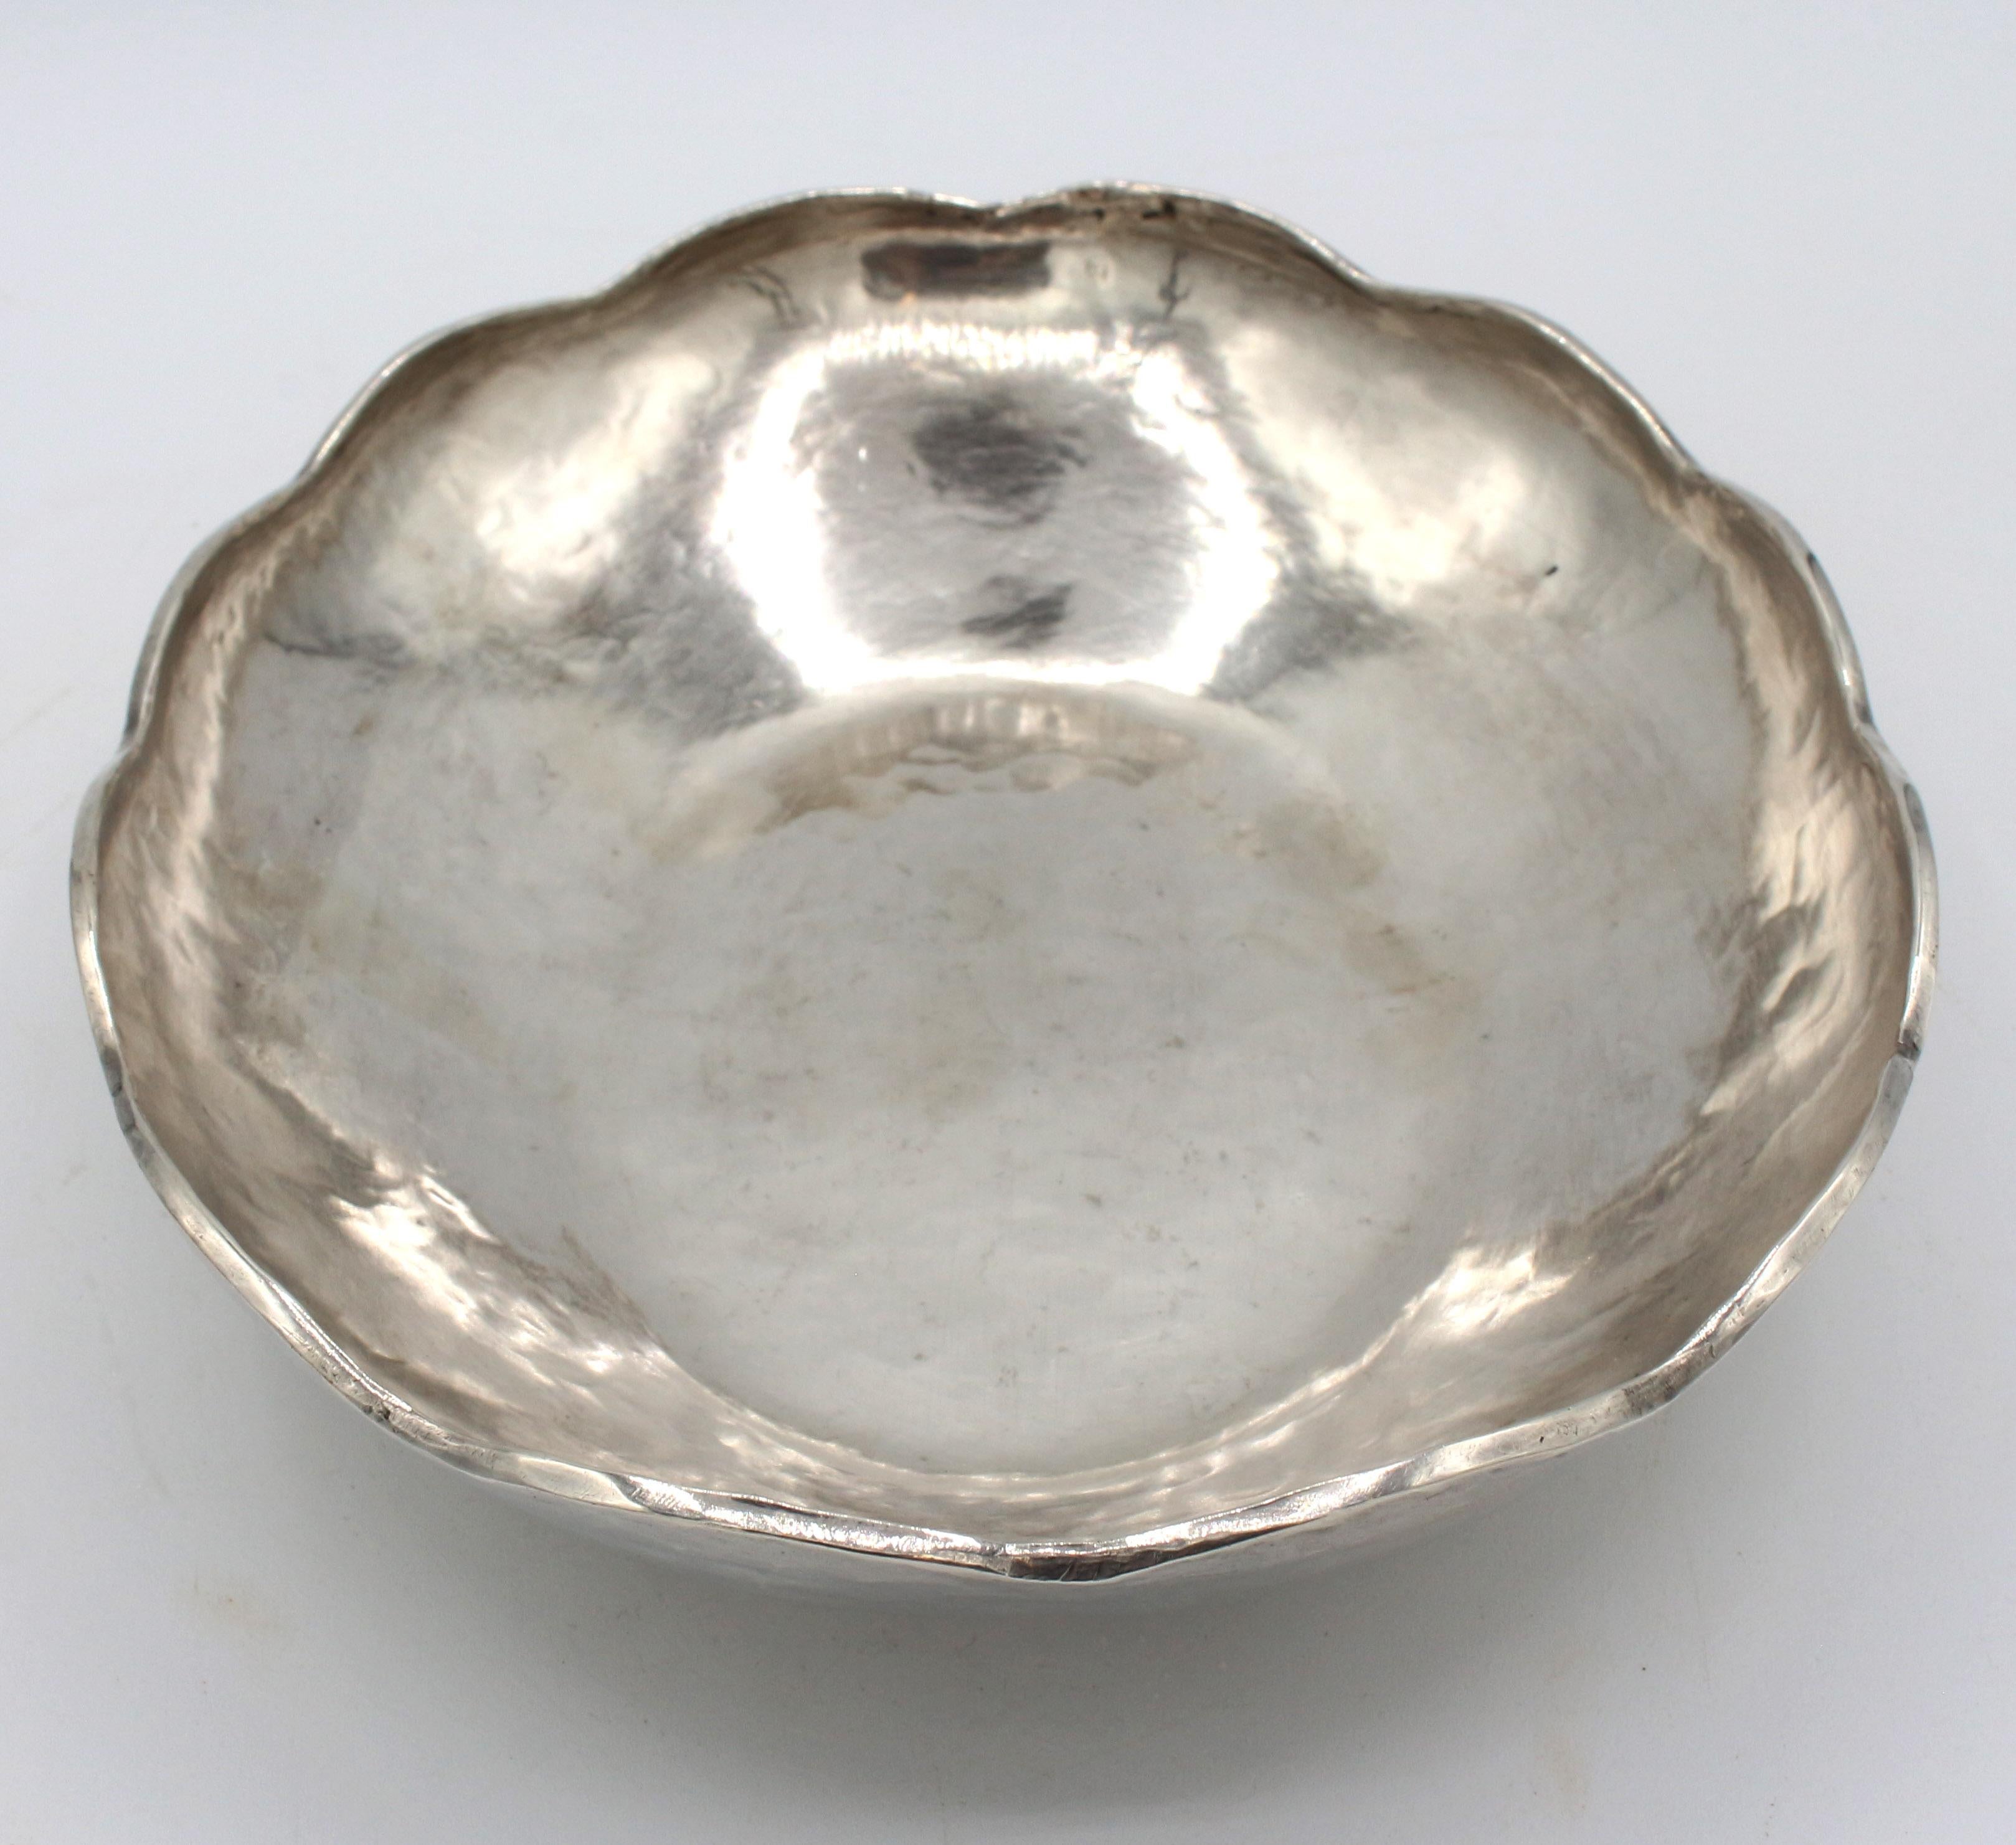 Mid-Century Modern Hammered Sterling Silver Oval Lobed Bowl, Peru c. 1960s-70s